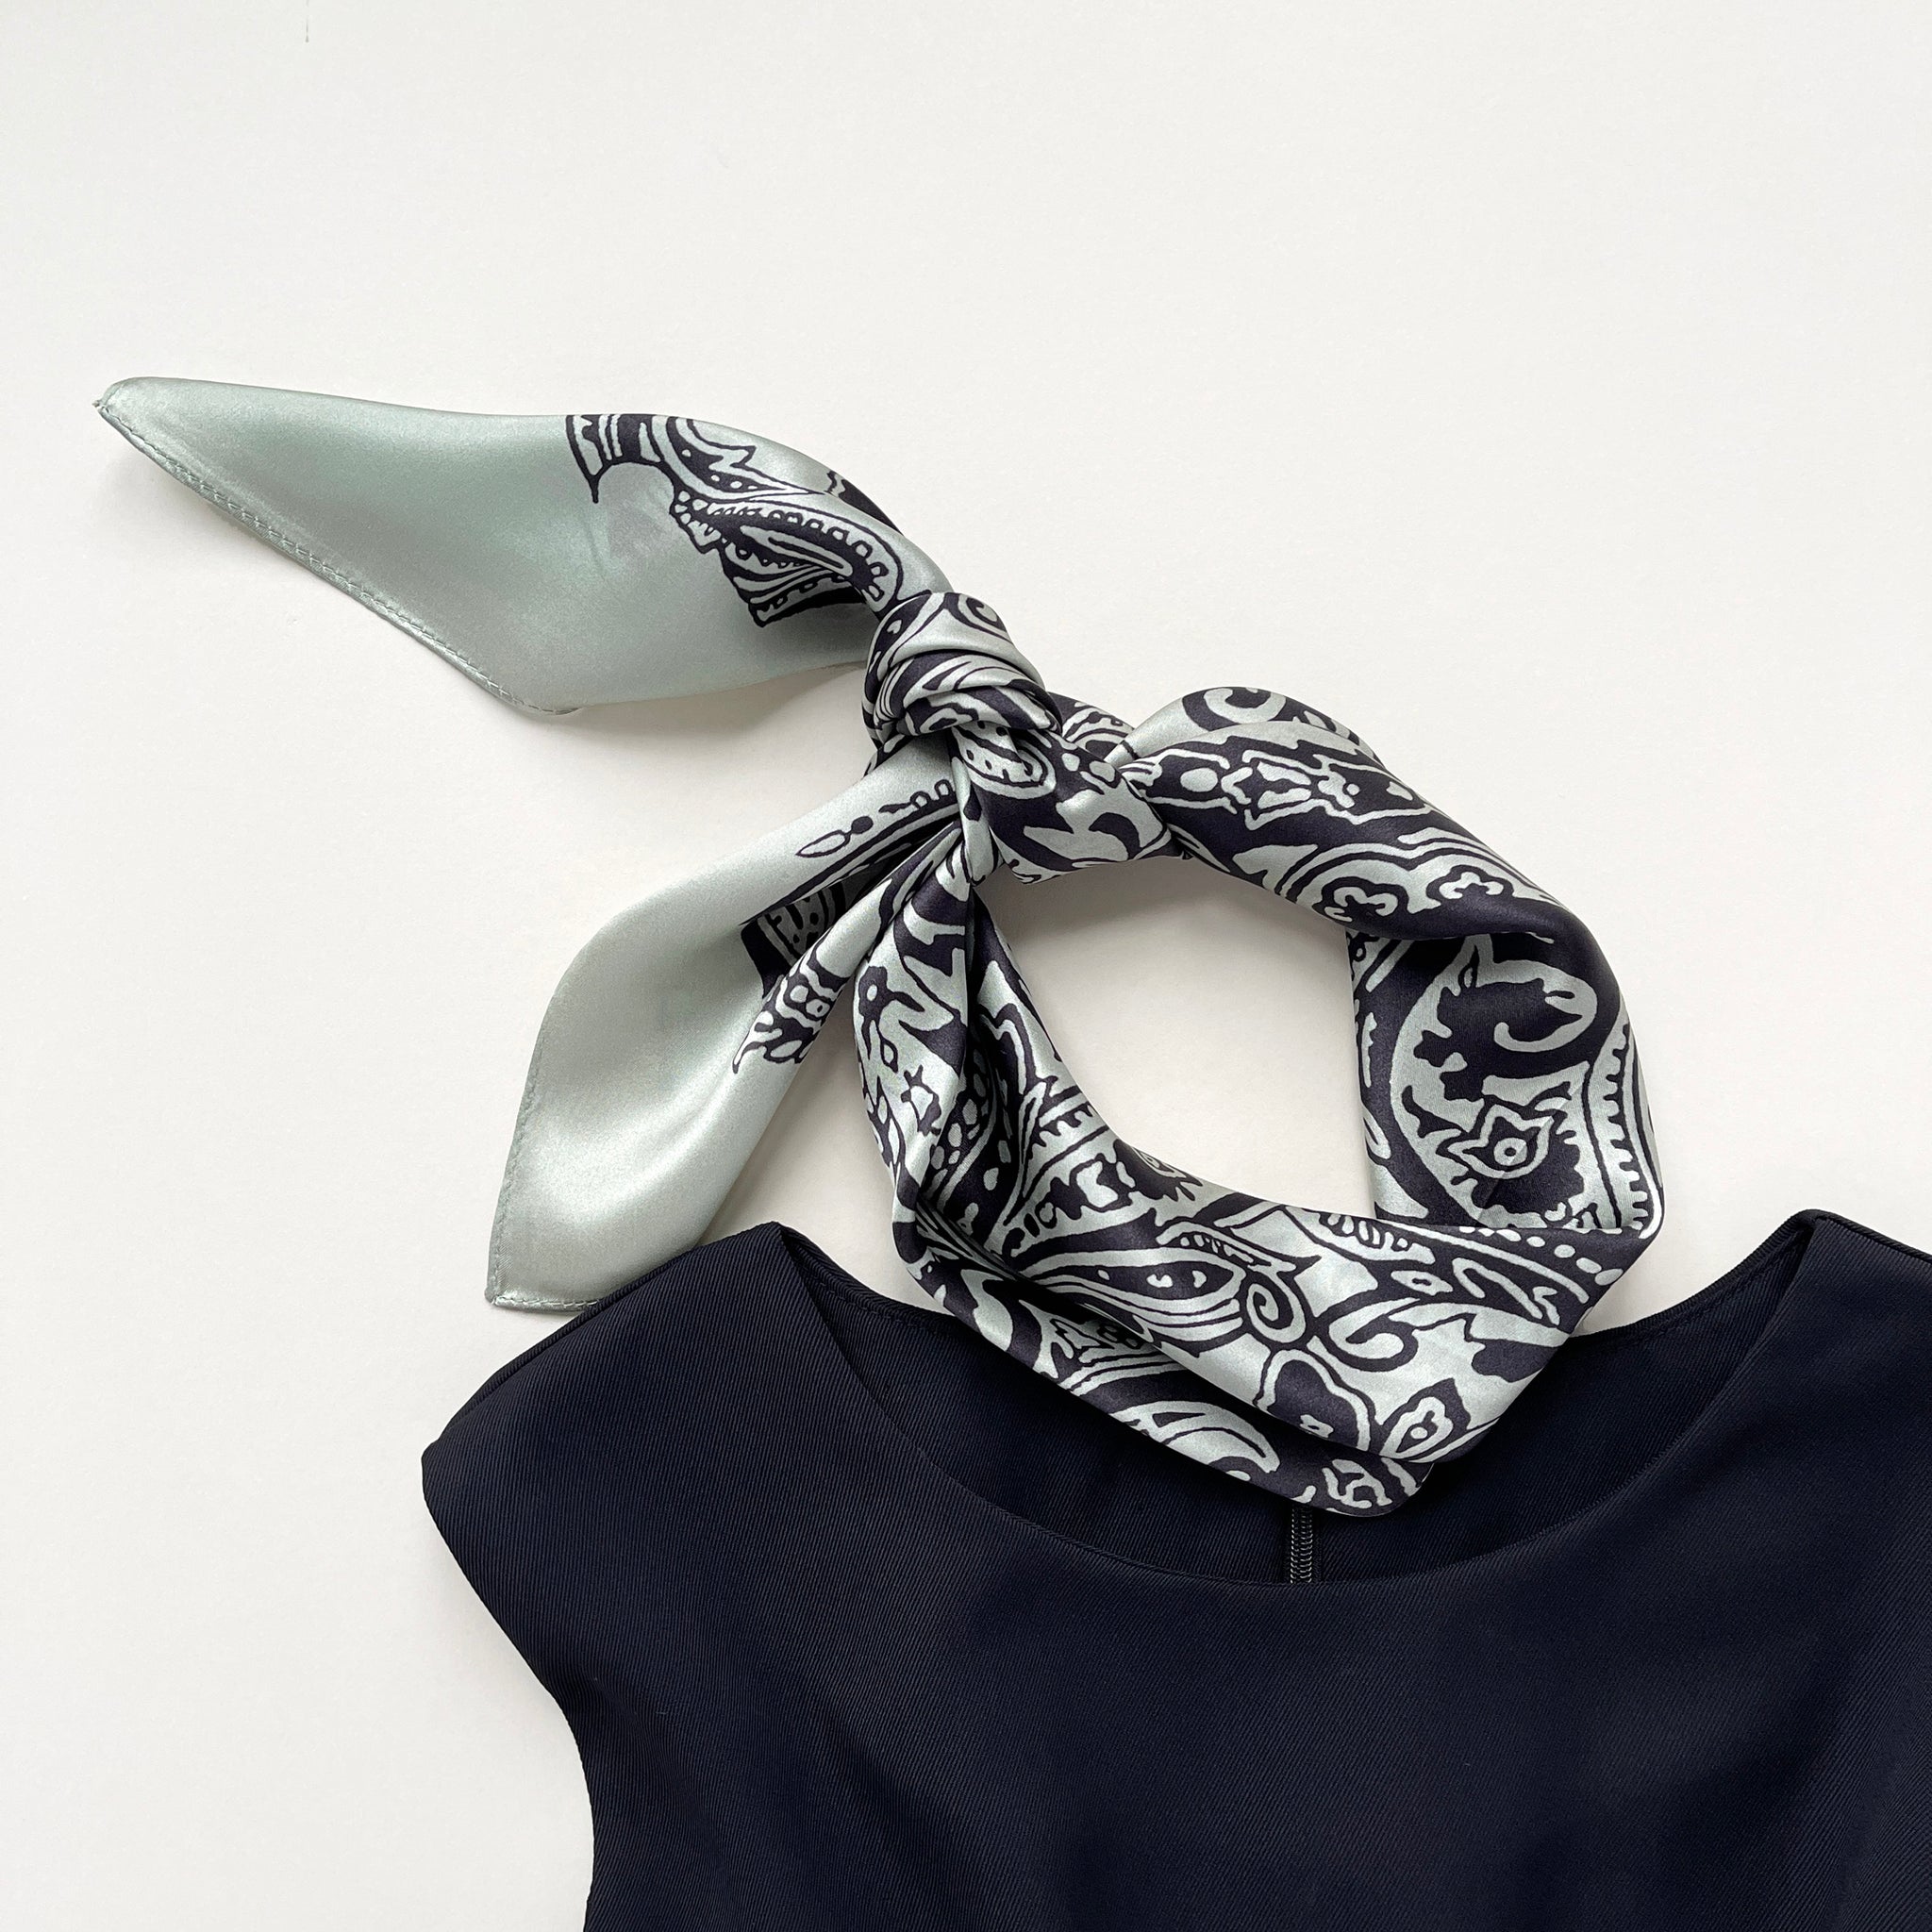 a pale pea green silk scarf with black boho style print, knotted as a neckerchief or headband, paired with a black sleeveless dress